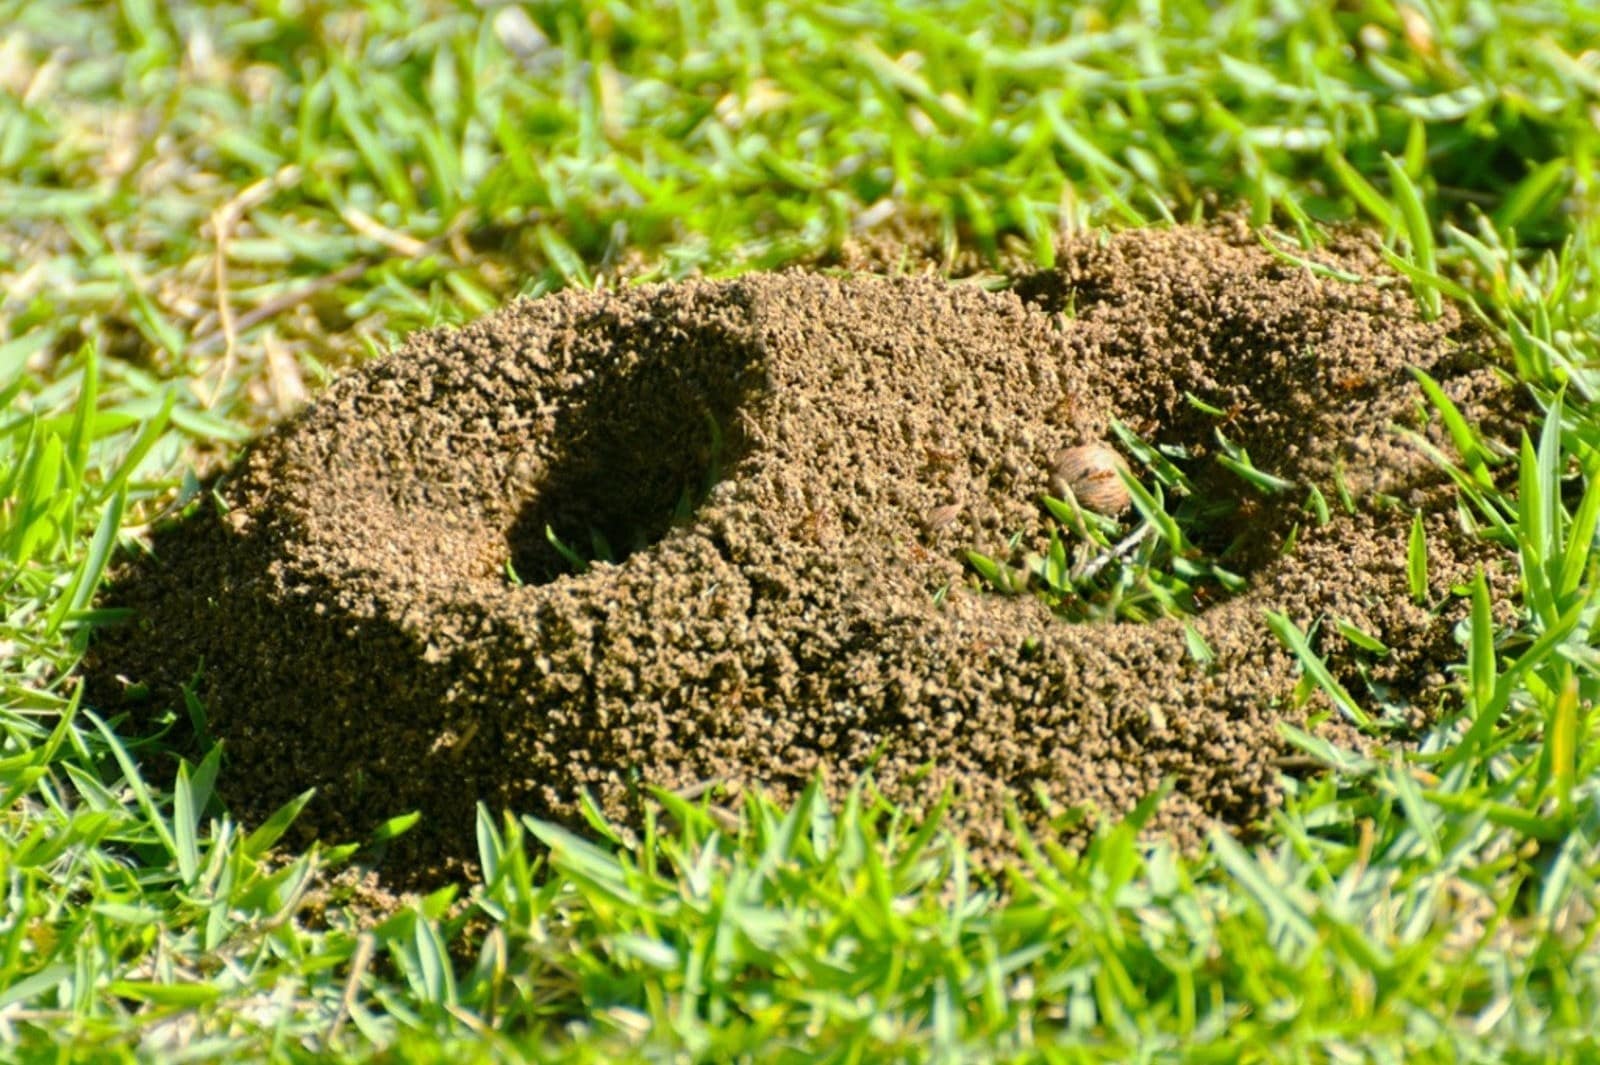 How To Kill Ants In Yard Without Killing Grass 1706137191 